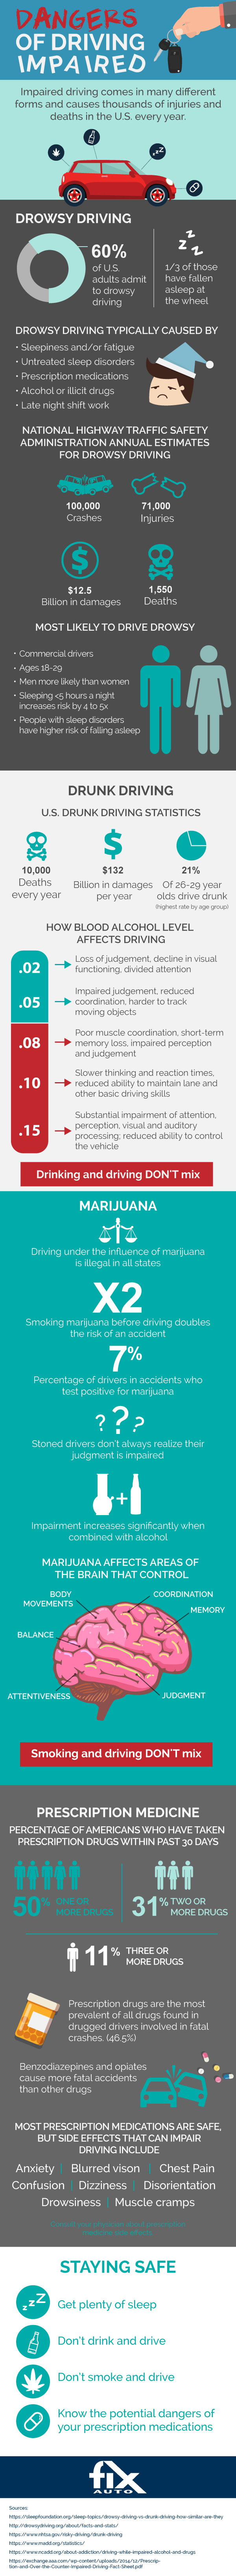 dangers of impaired driving